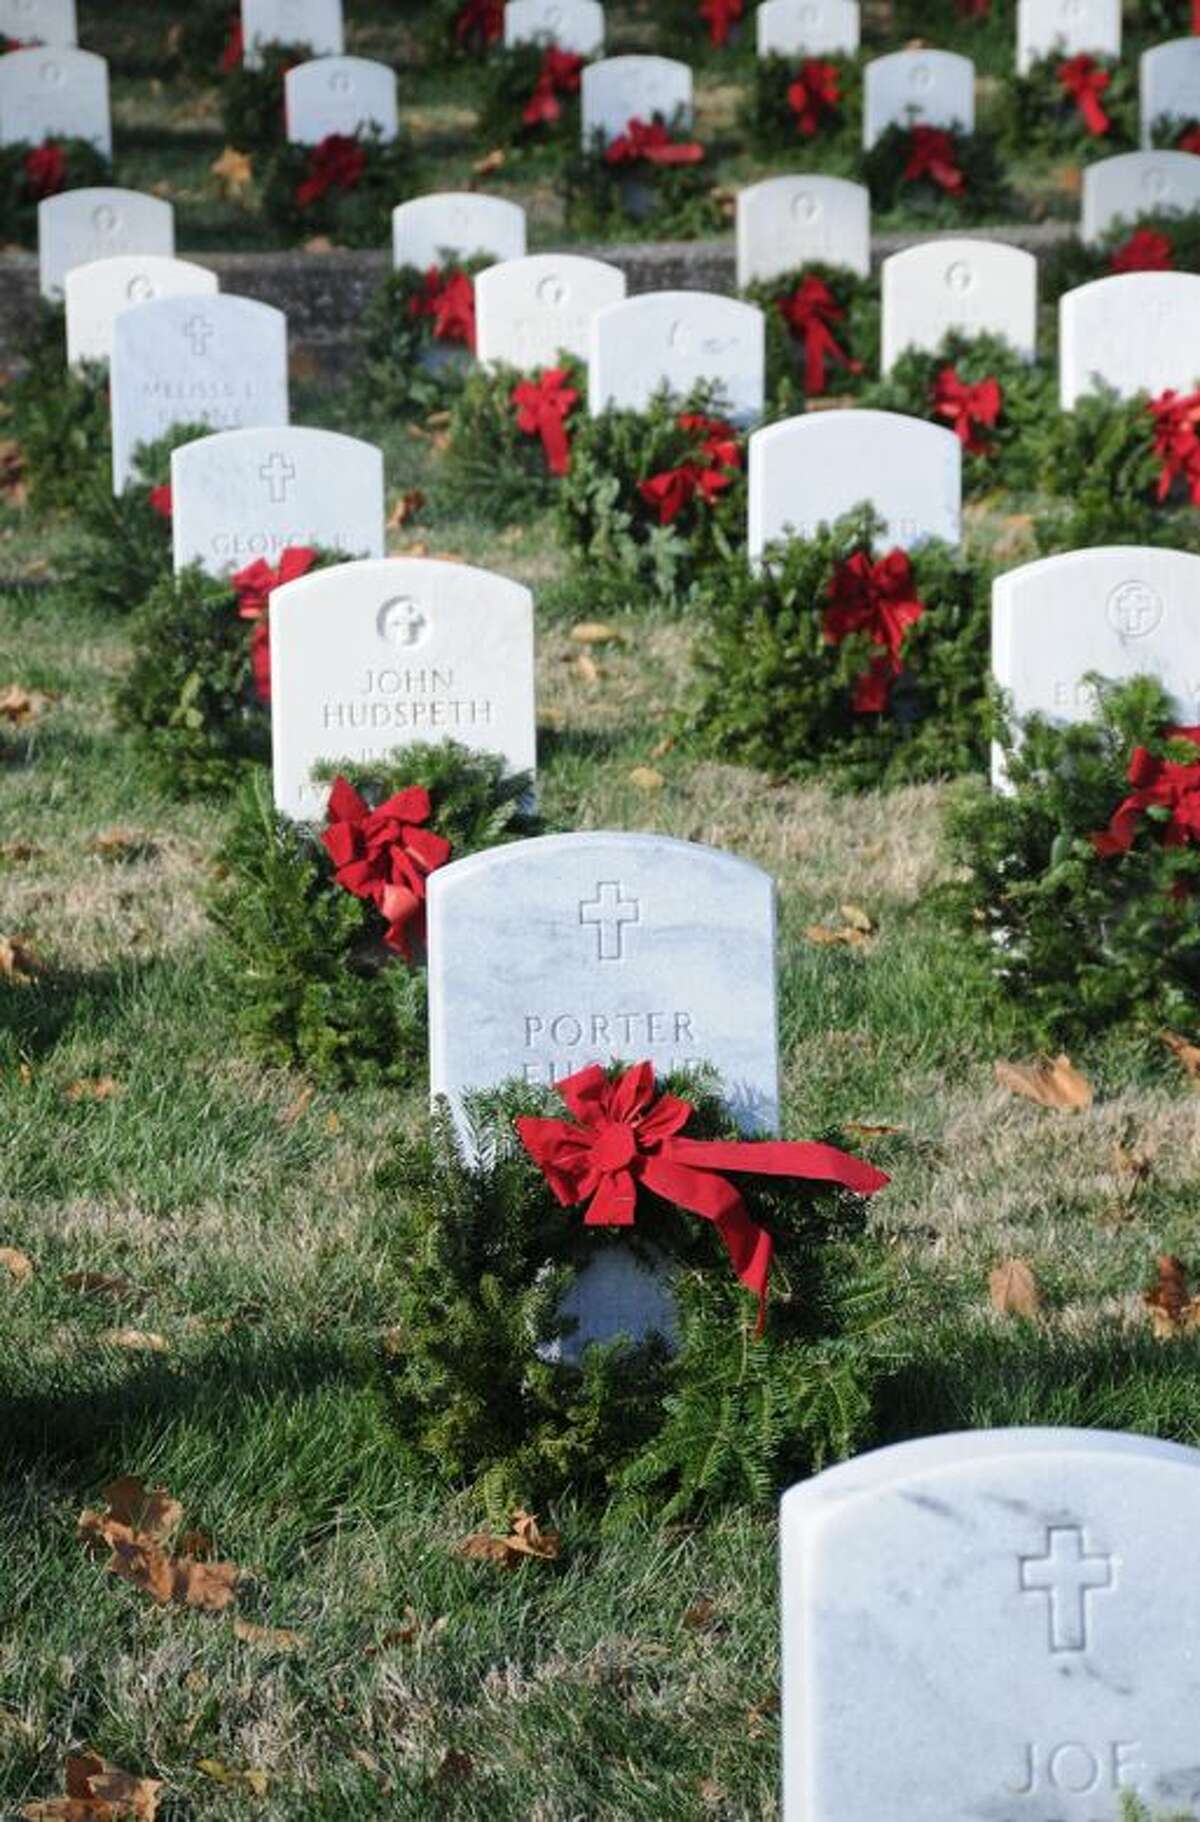 Wreaths placed during Saturday's ceremony adorn the graves at Alton National Cemetery.